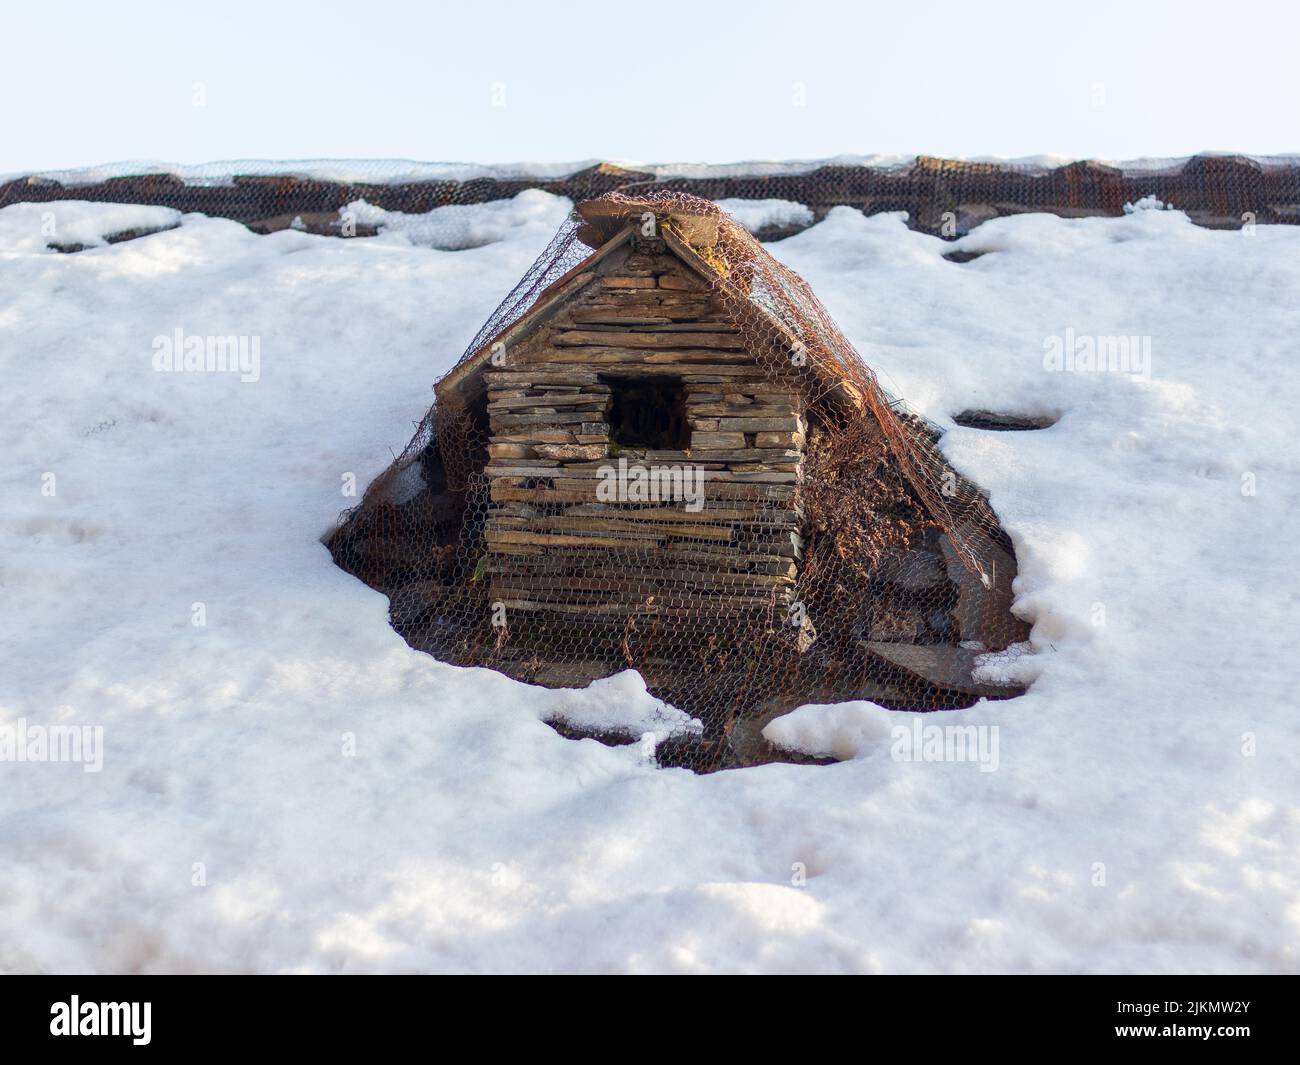 A snow-clad chimney in Landour Mussourie, India Stock Photo